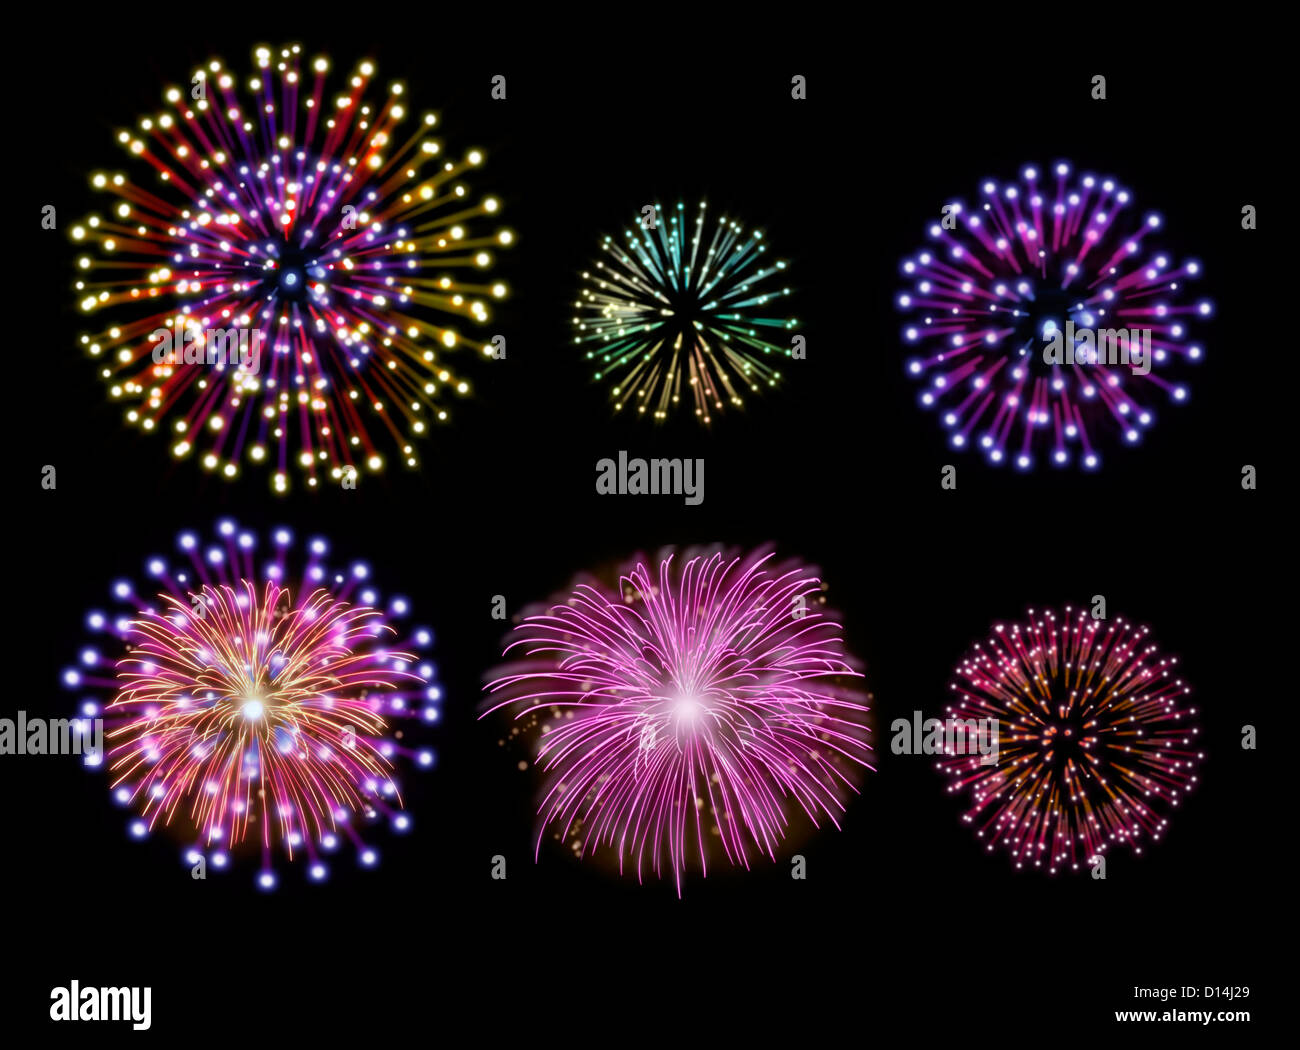 Collection of colorful fireworks, sparklers, salute and petards explosions. Design elements isolated over black background Stock Photo